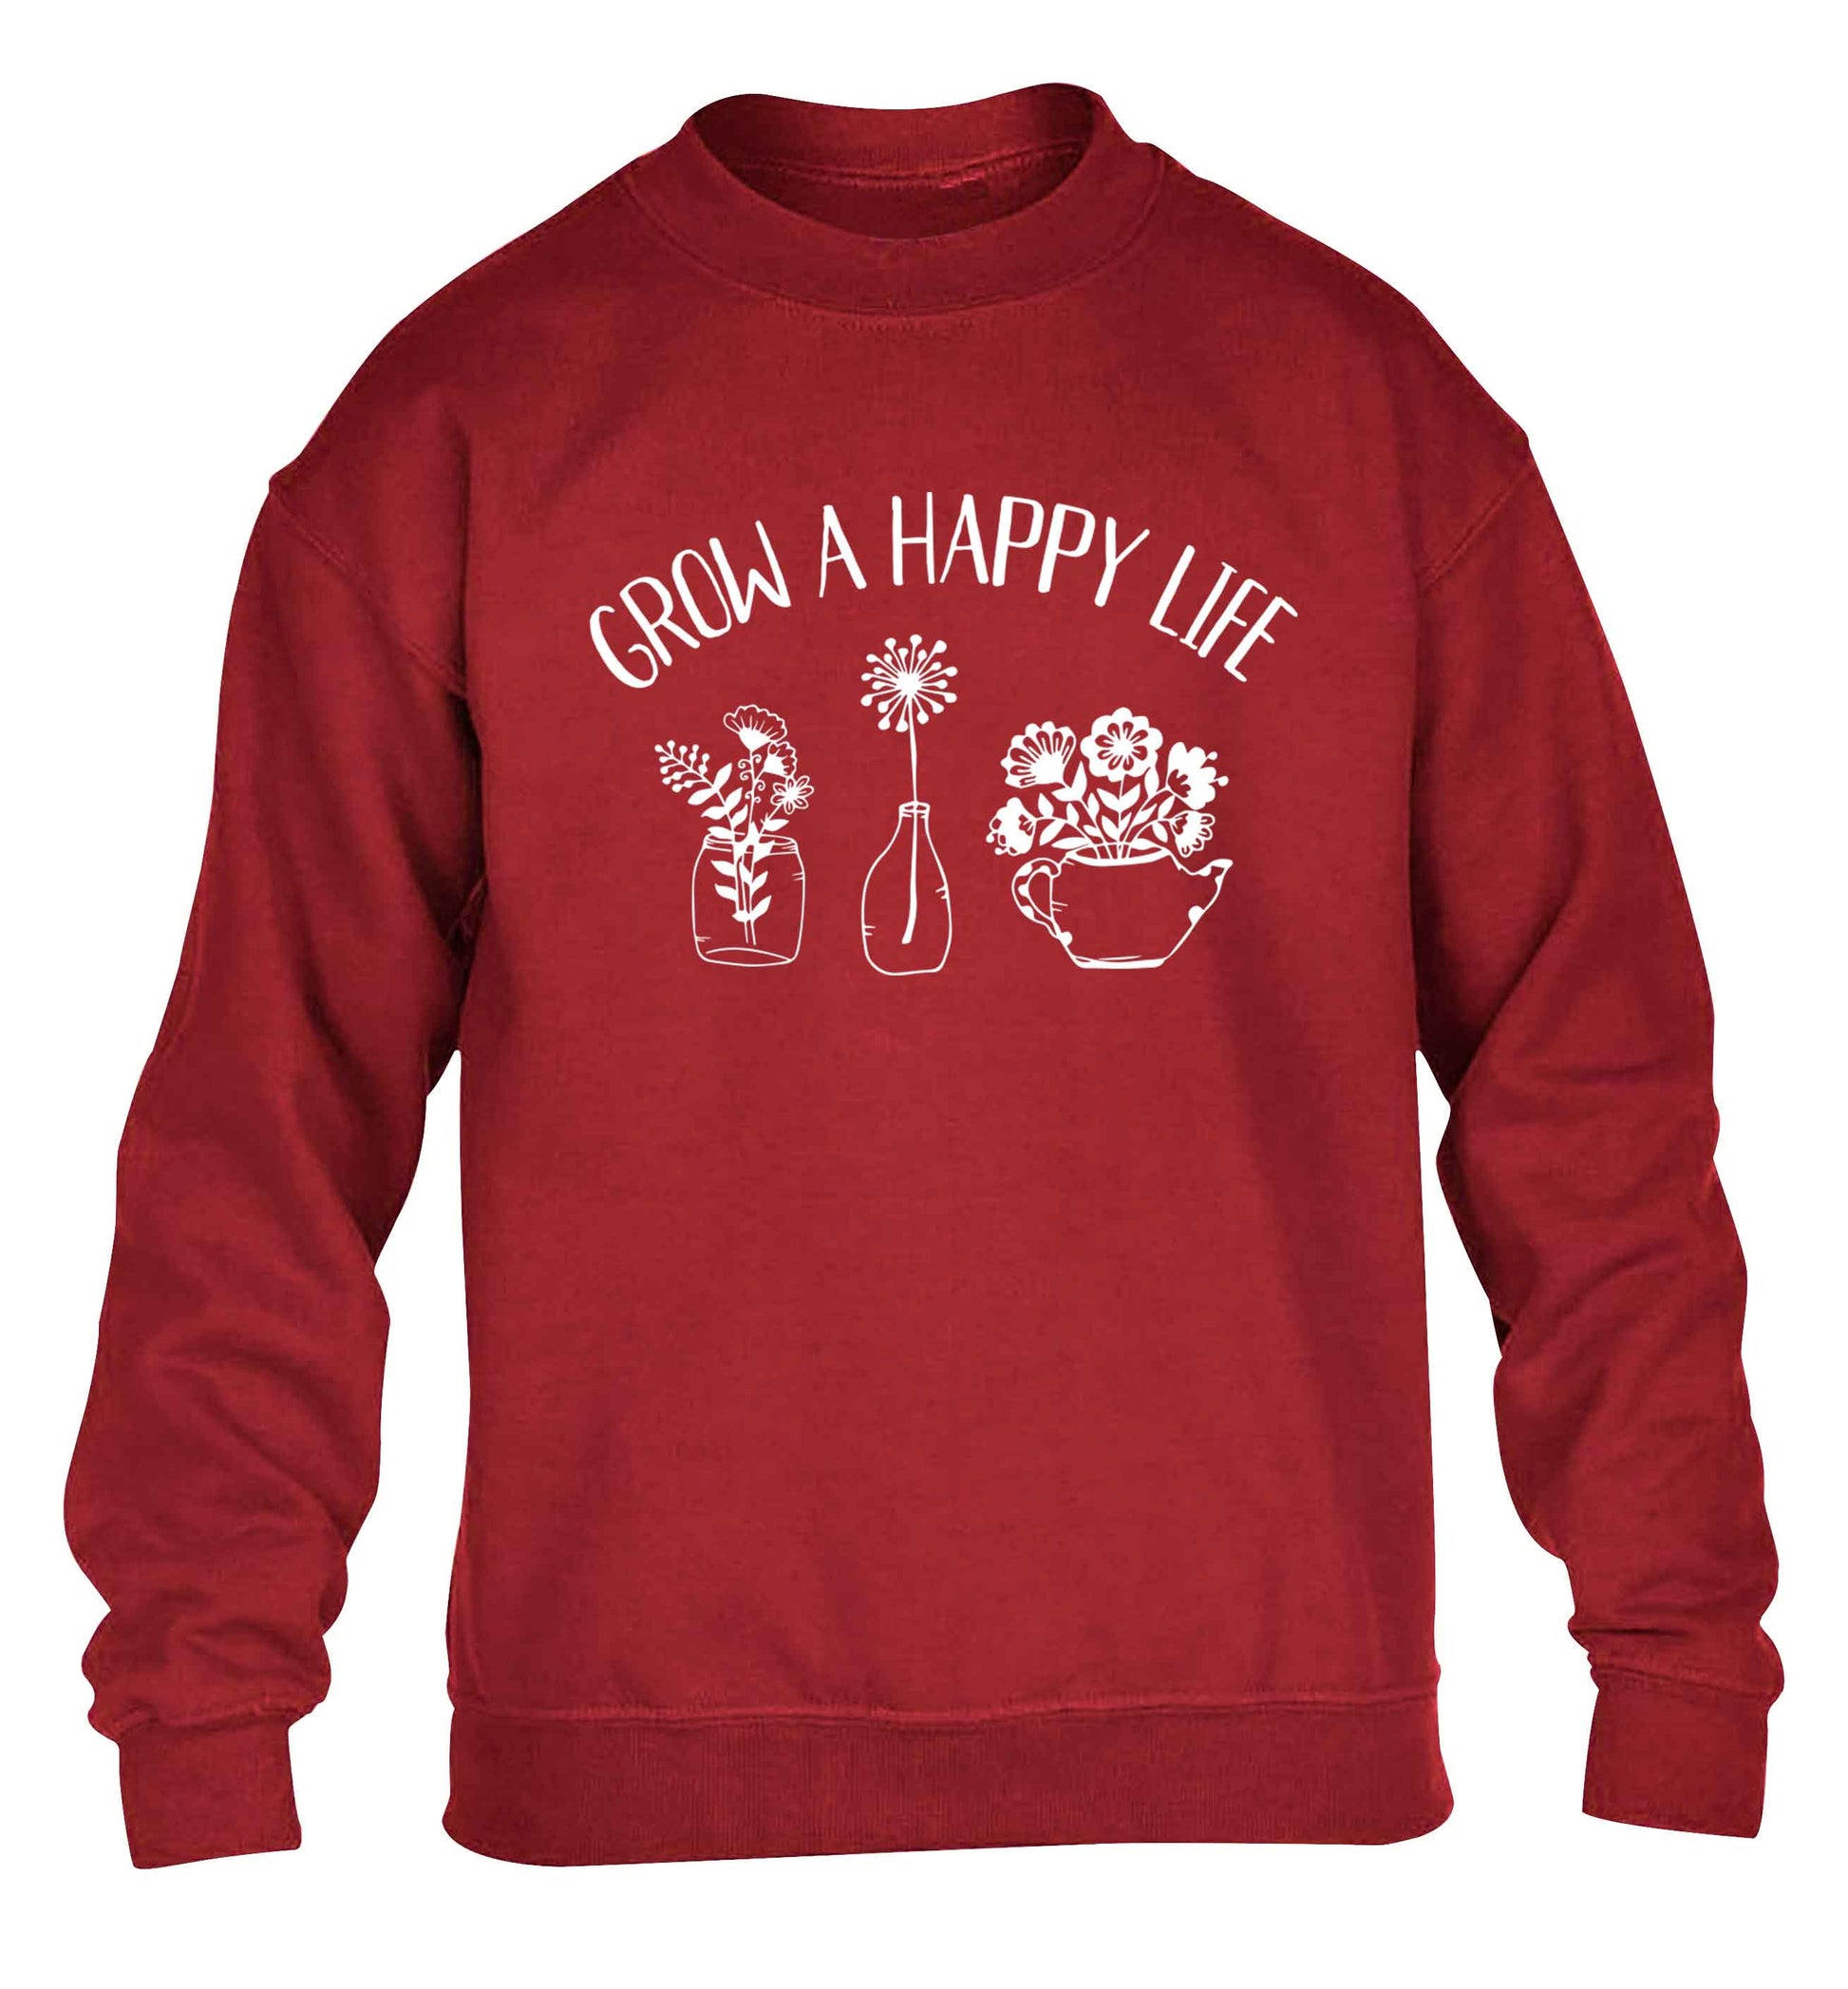 Grow a happy life children's grey sweater 12-13 Years